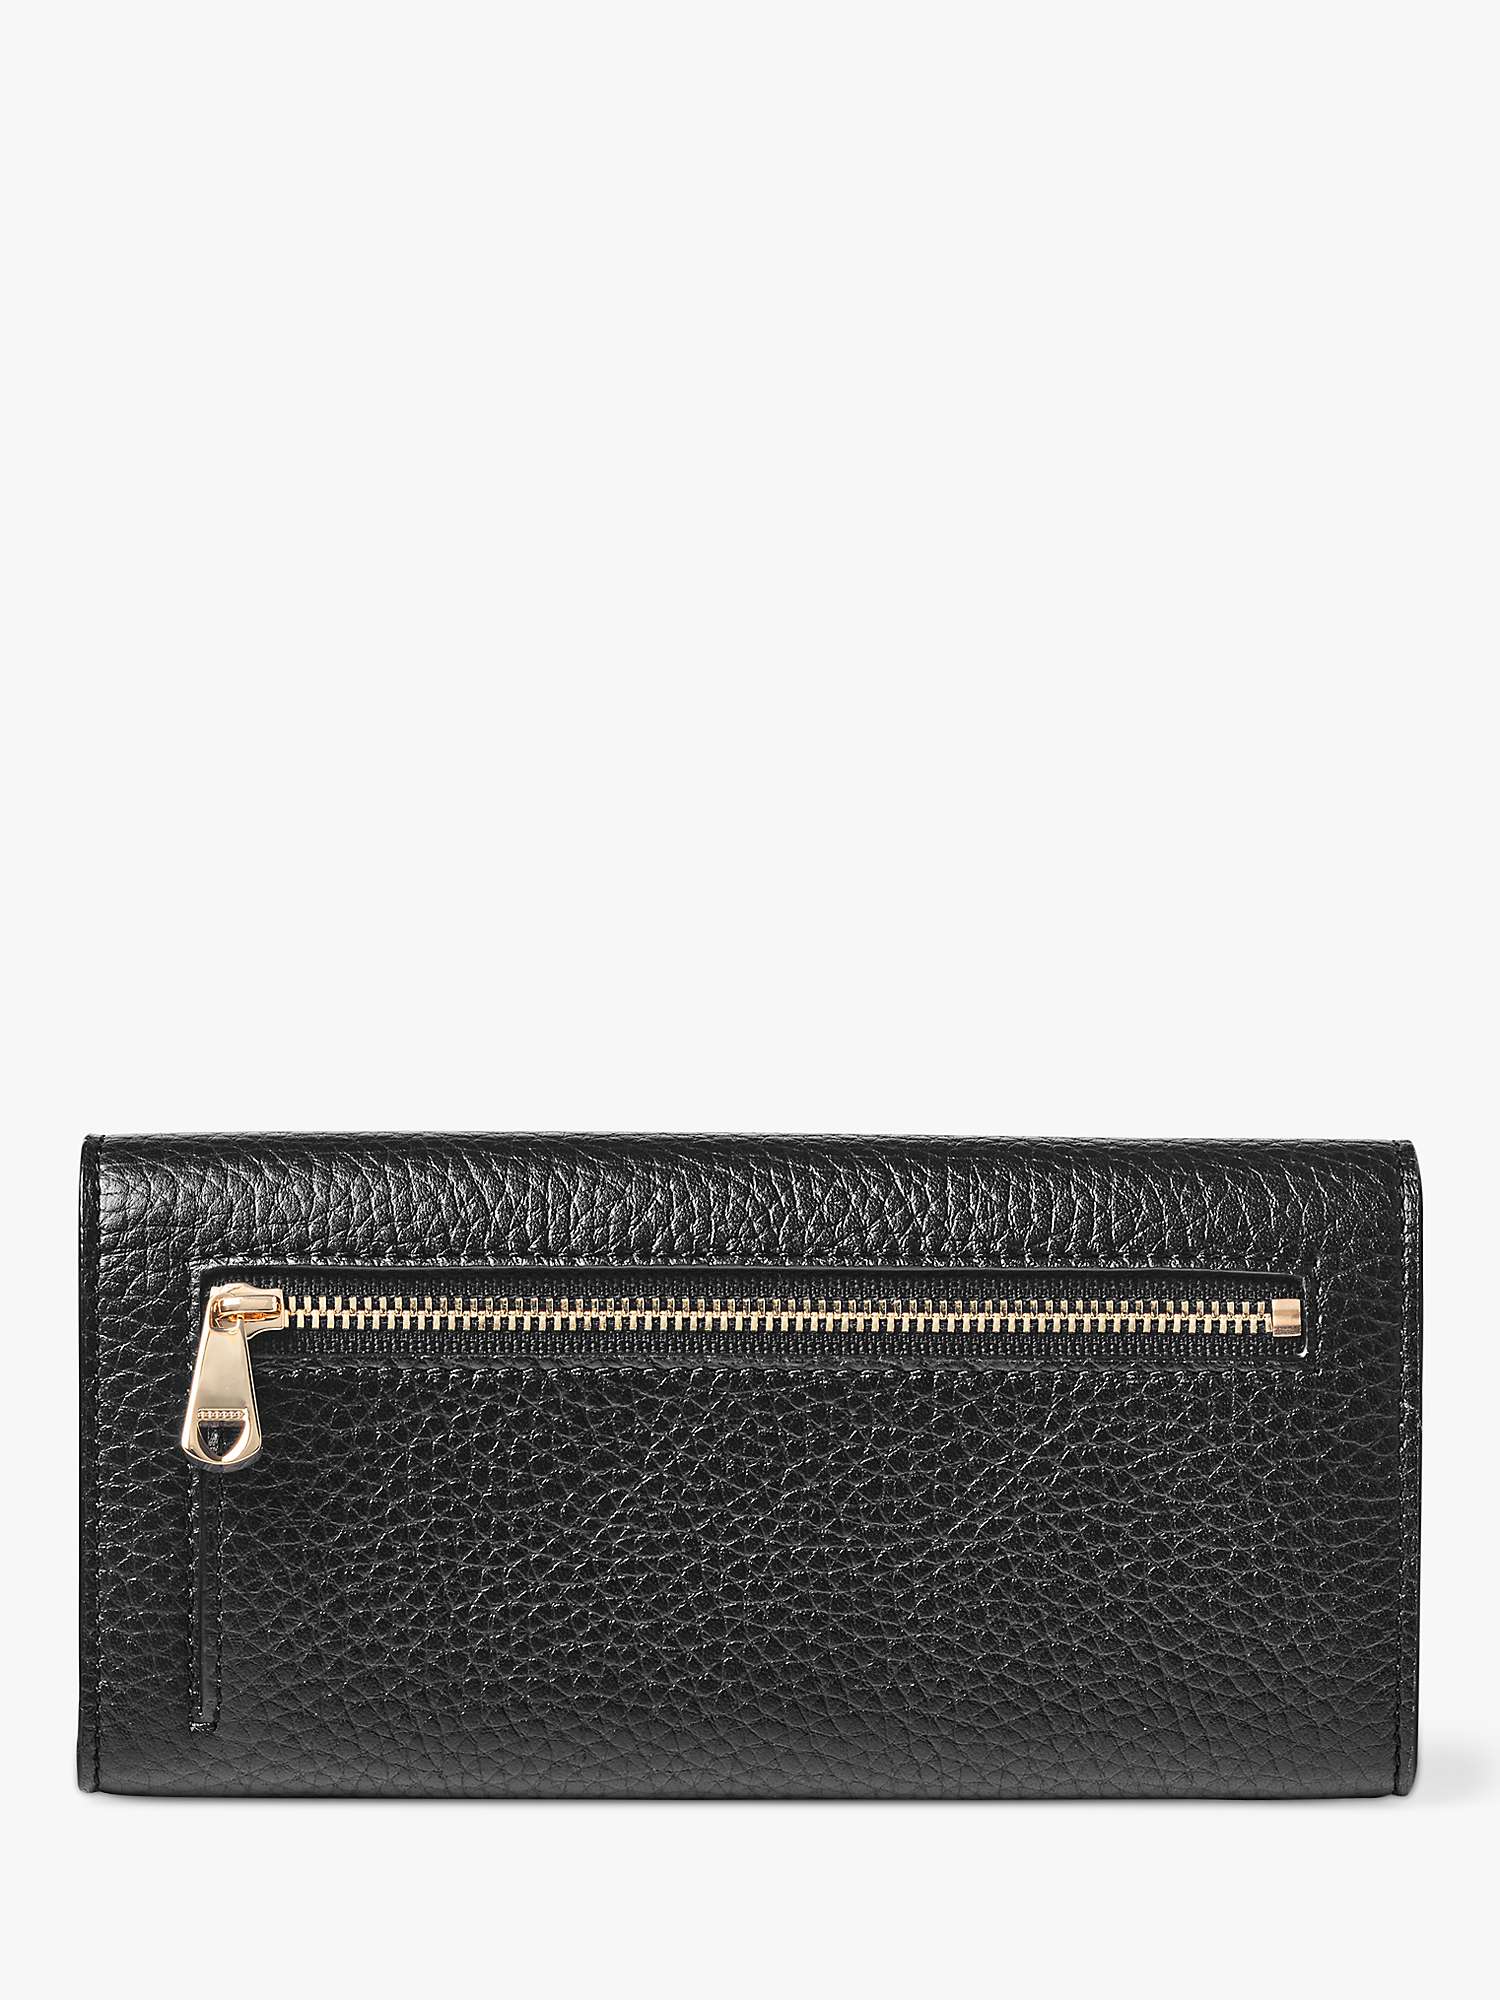 Buy Aspinal of London Essential Pebble Leather Purse Online at johnlewis.com